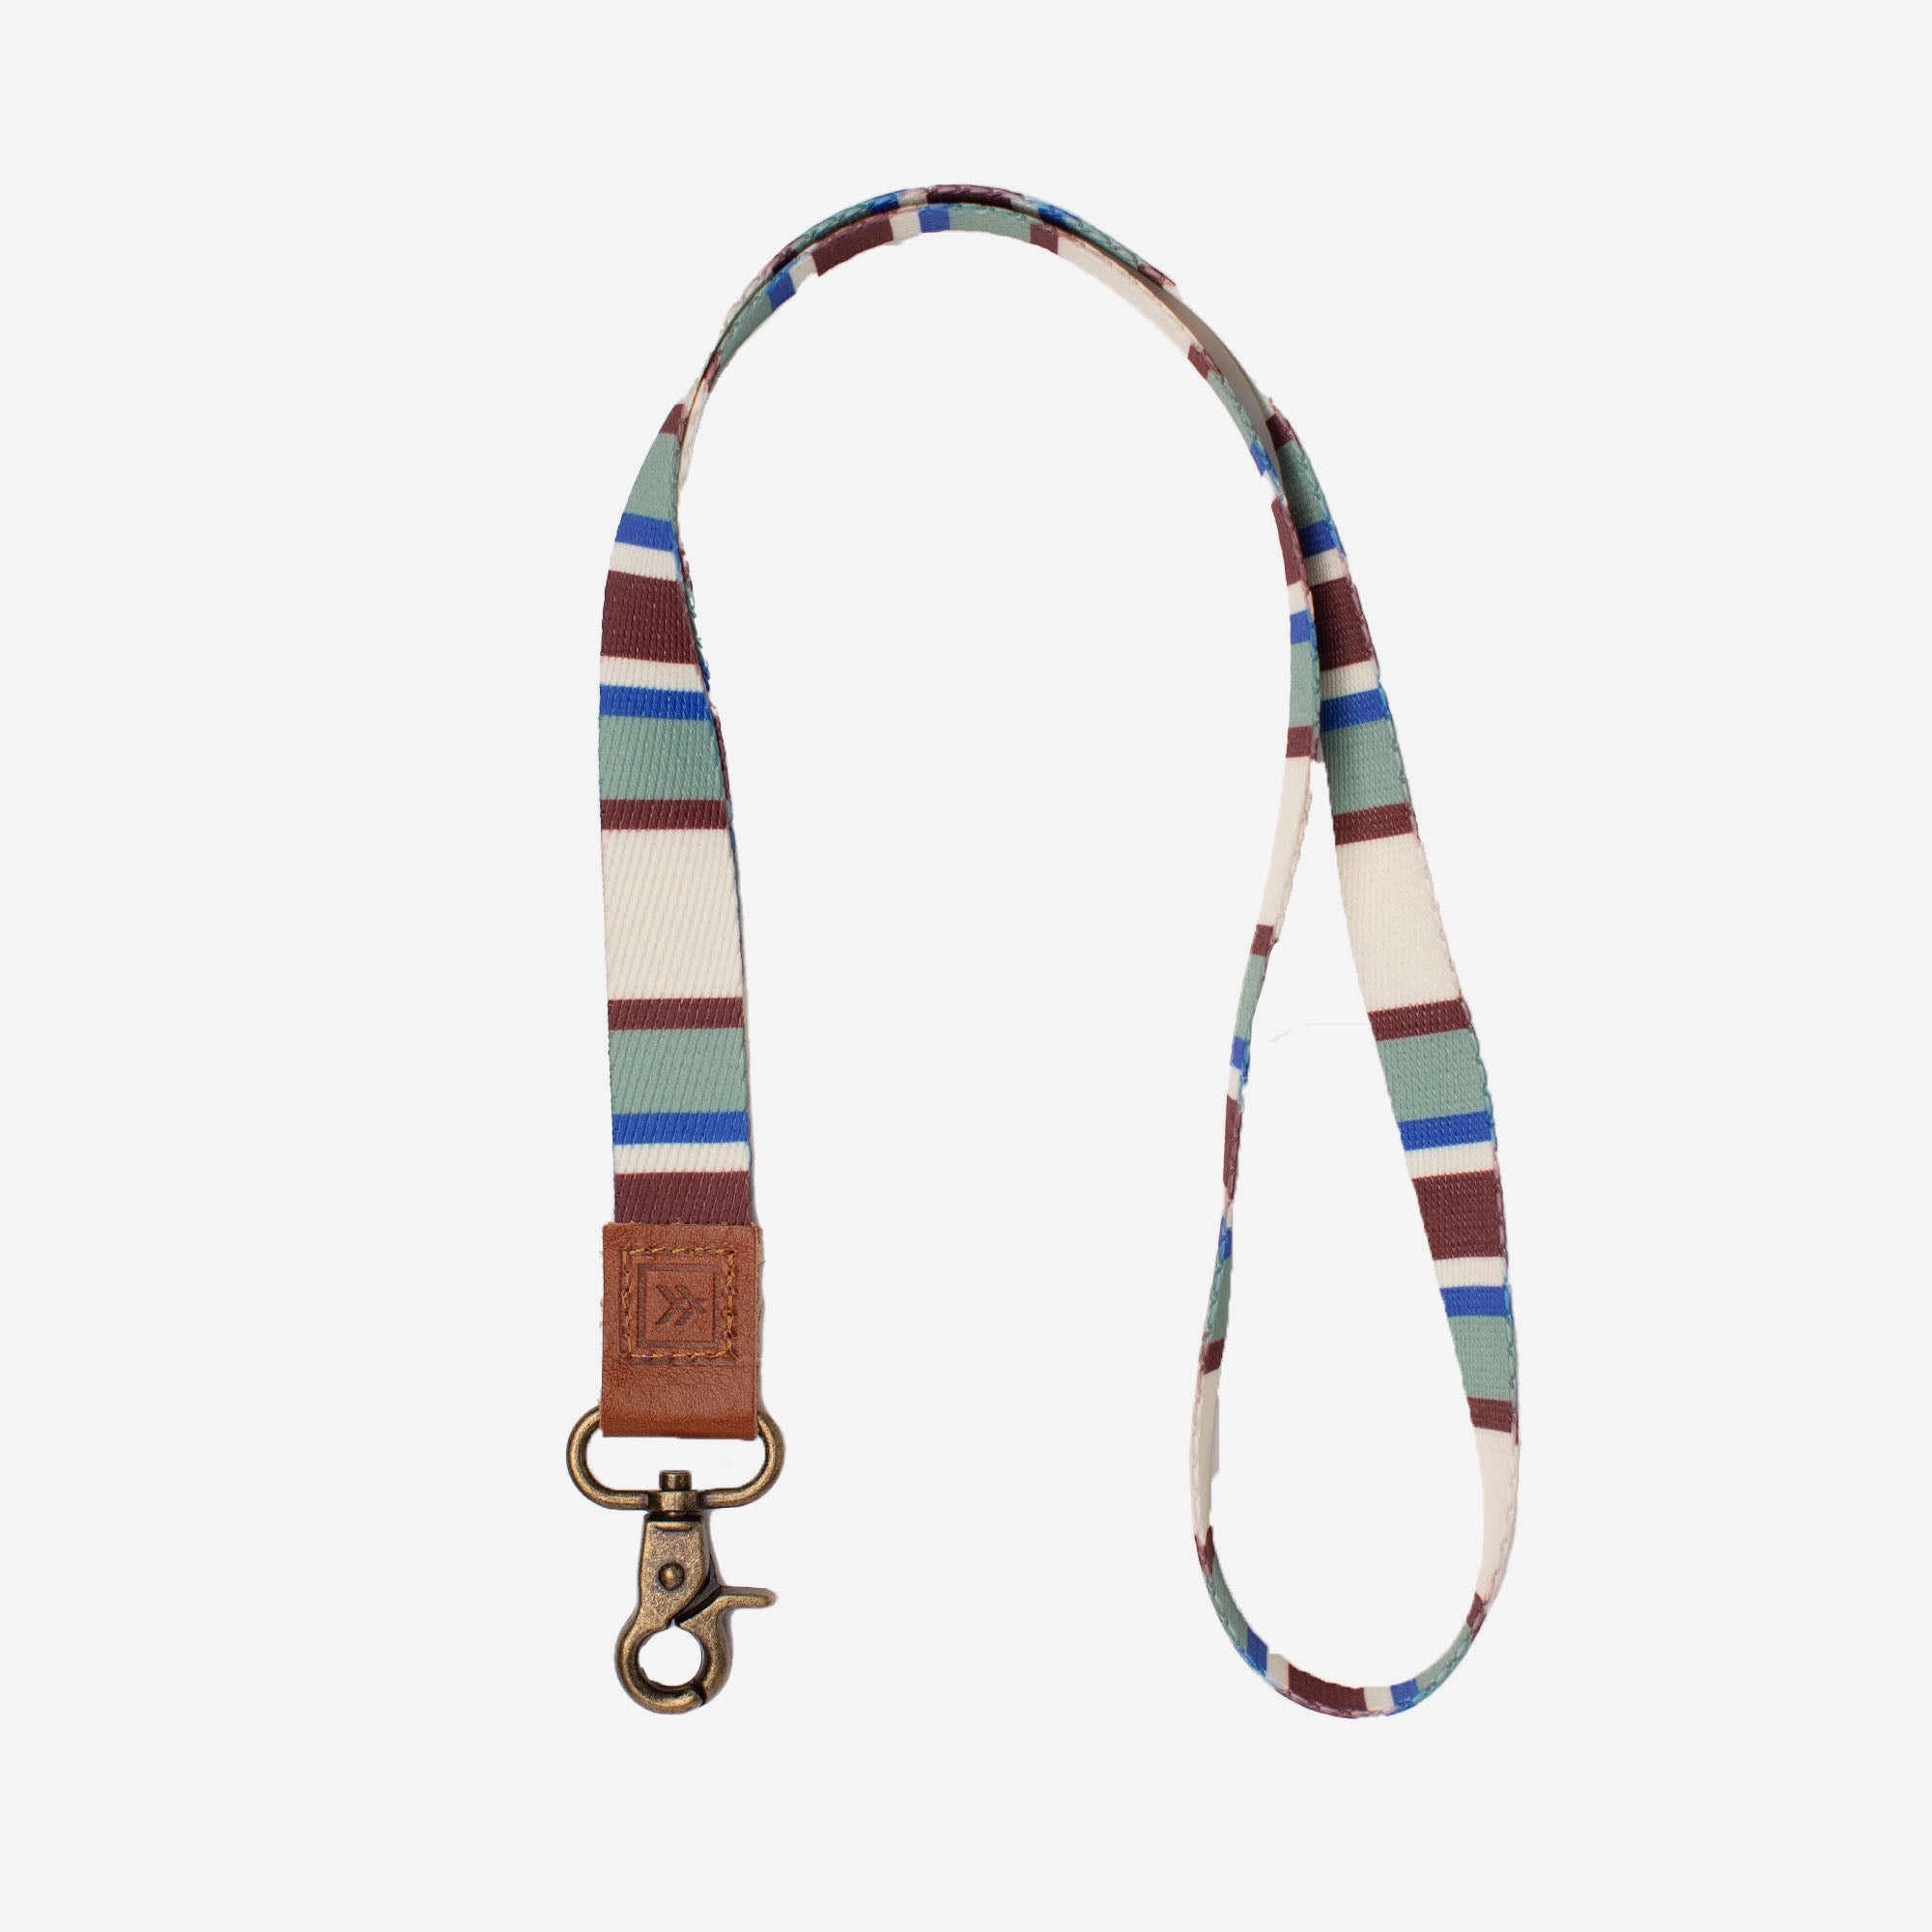 Brown, green, and blue striped neck lanyard